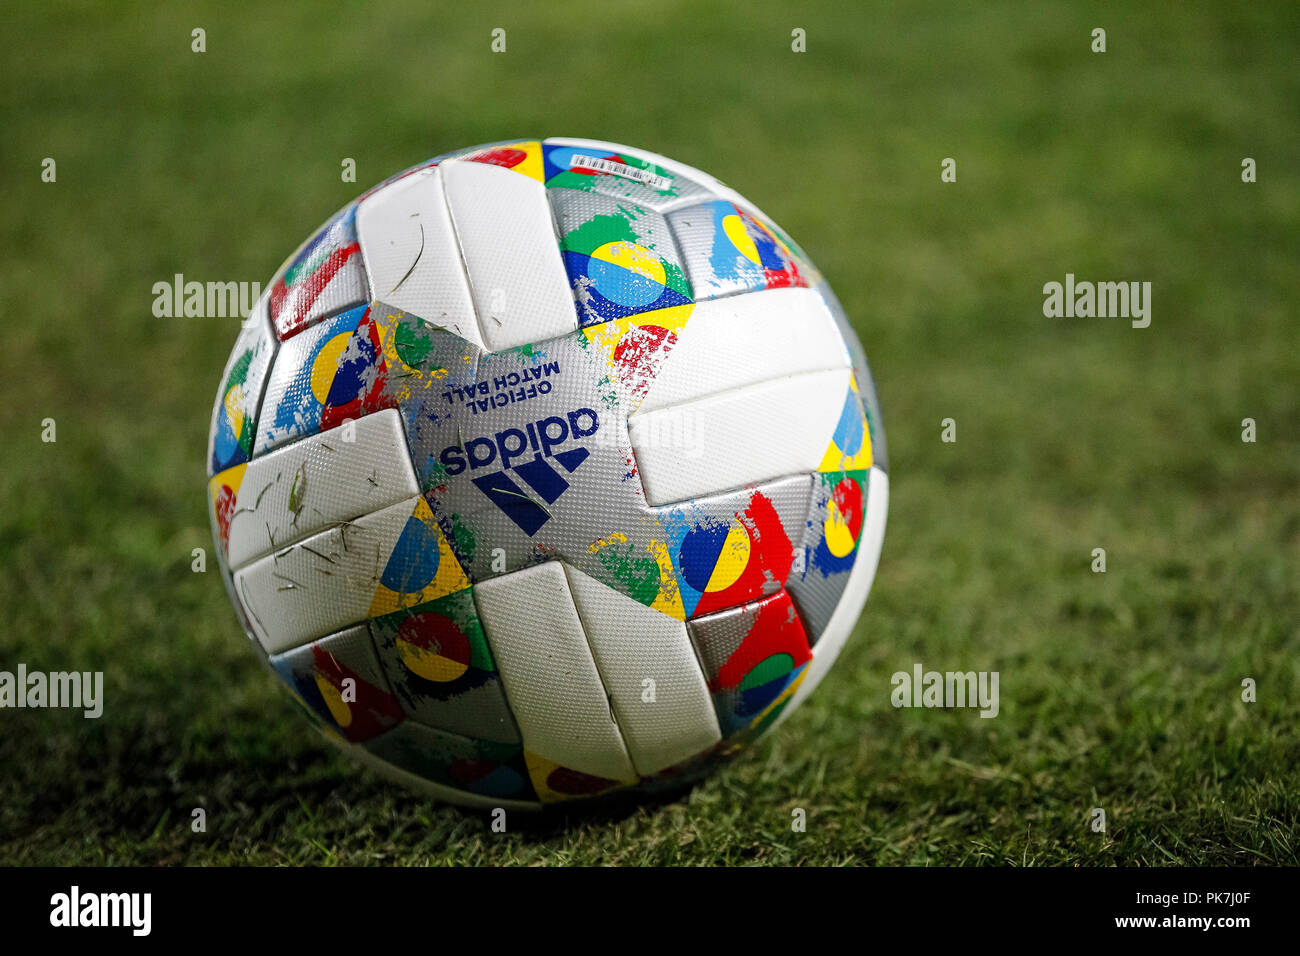 Elche, Spain. 11st September, 2018. Adidas Nations League, official match  balls of UEFA Nations League 2018/2019 on the grass. Ball has colorful  design. UEFA Nations League, Group 4, League A, match between